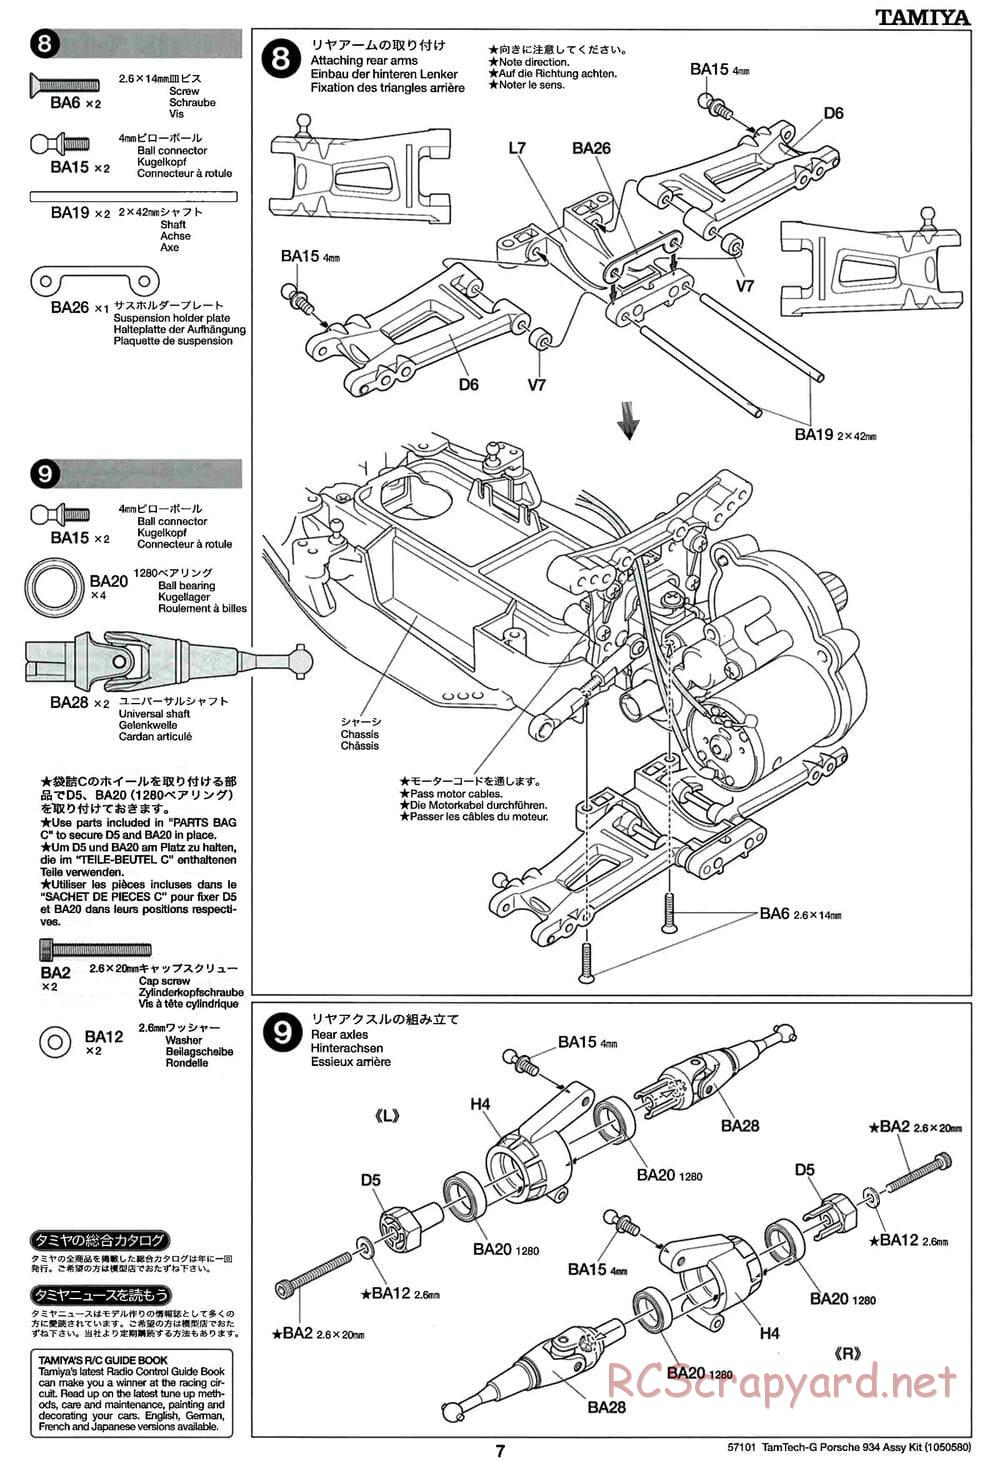 Tamiya - Porsche Turbo RSR - GT-01 Chassis - Manual - Page 7